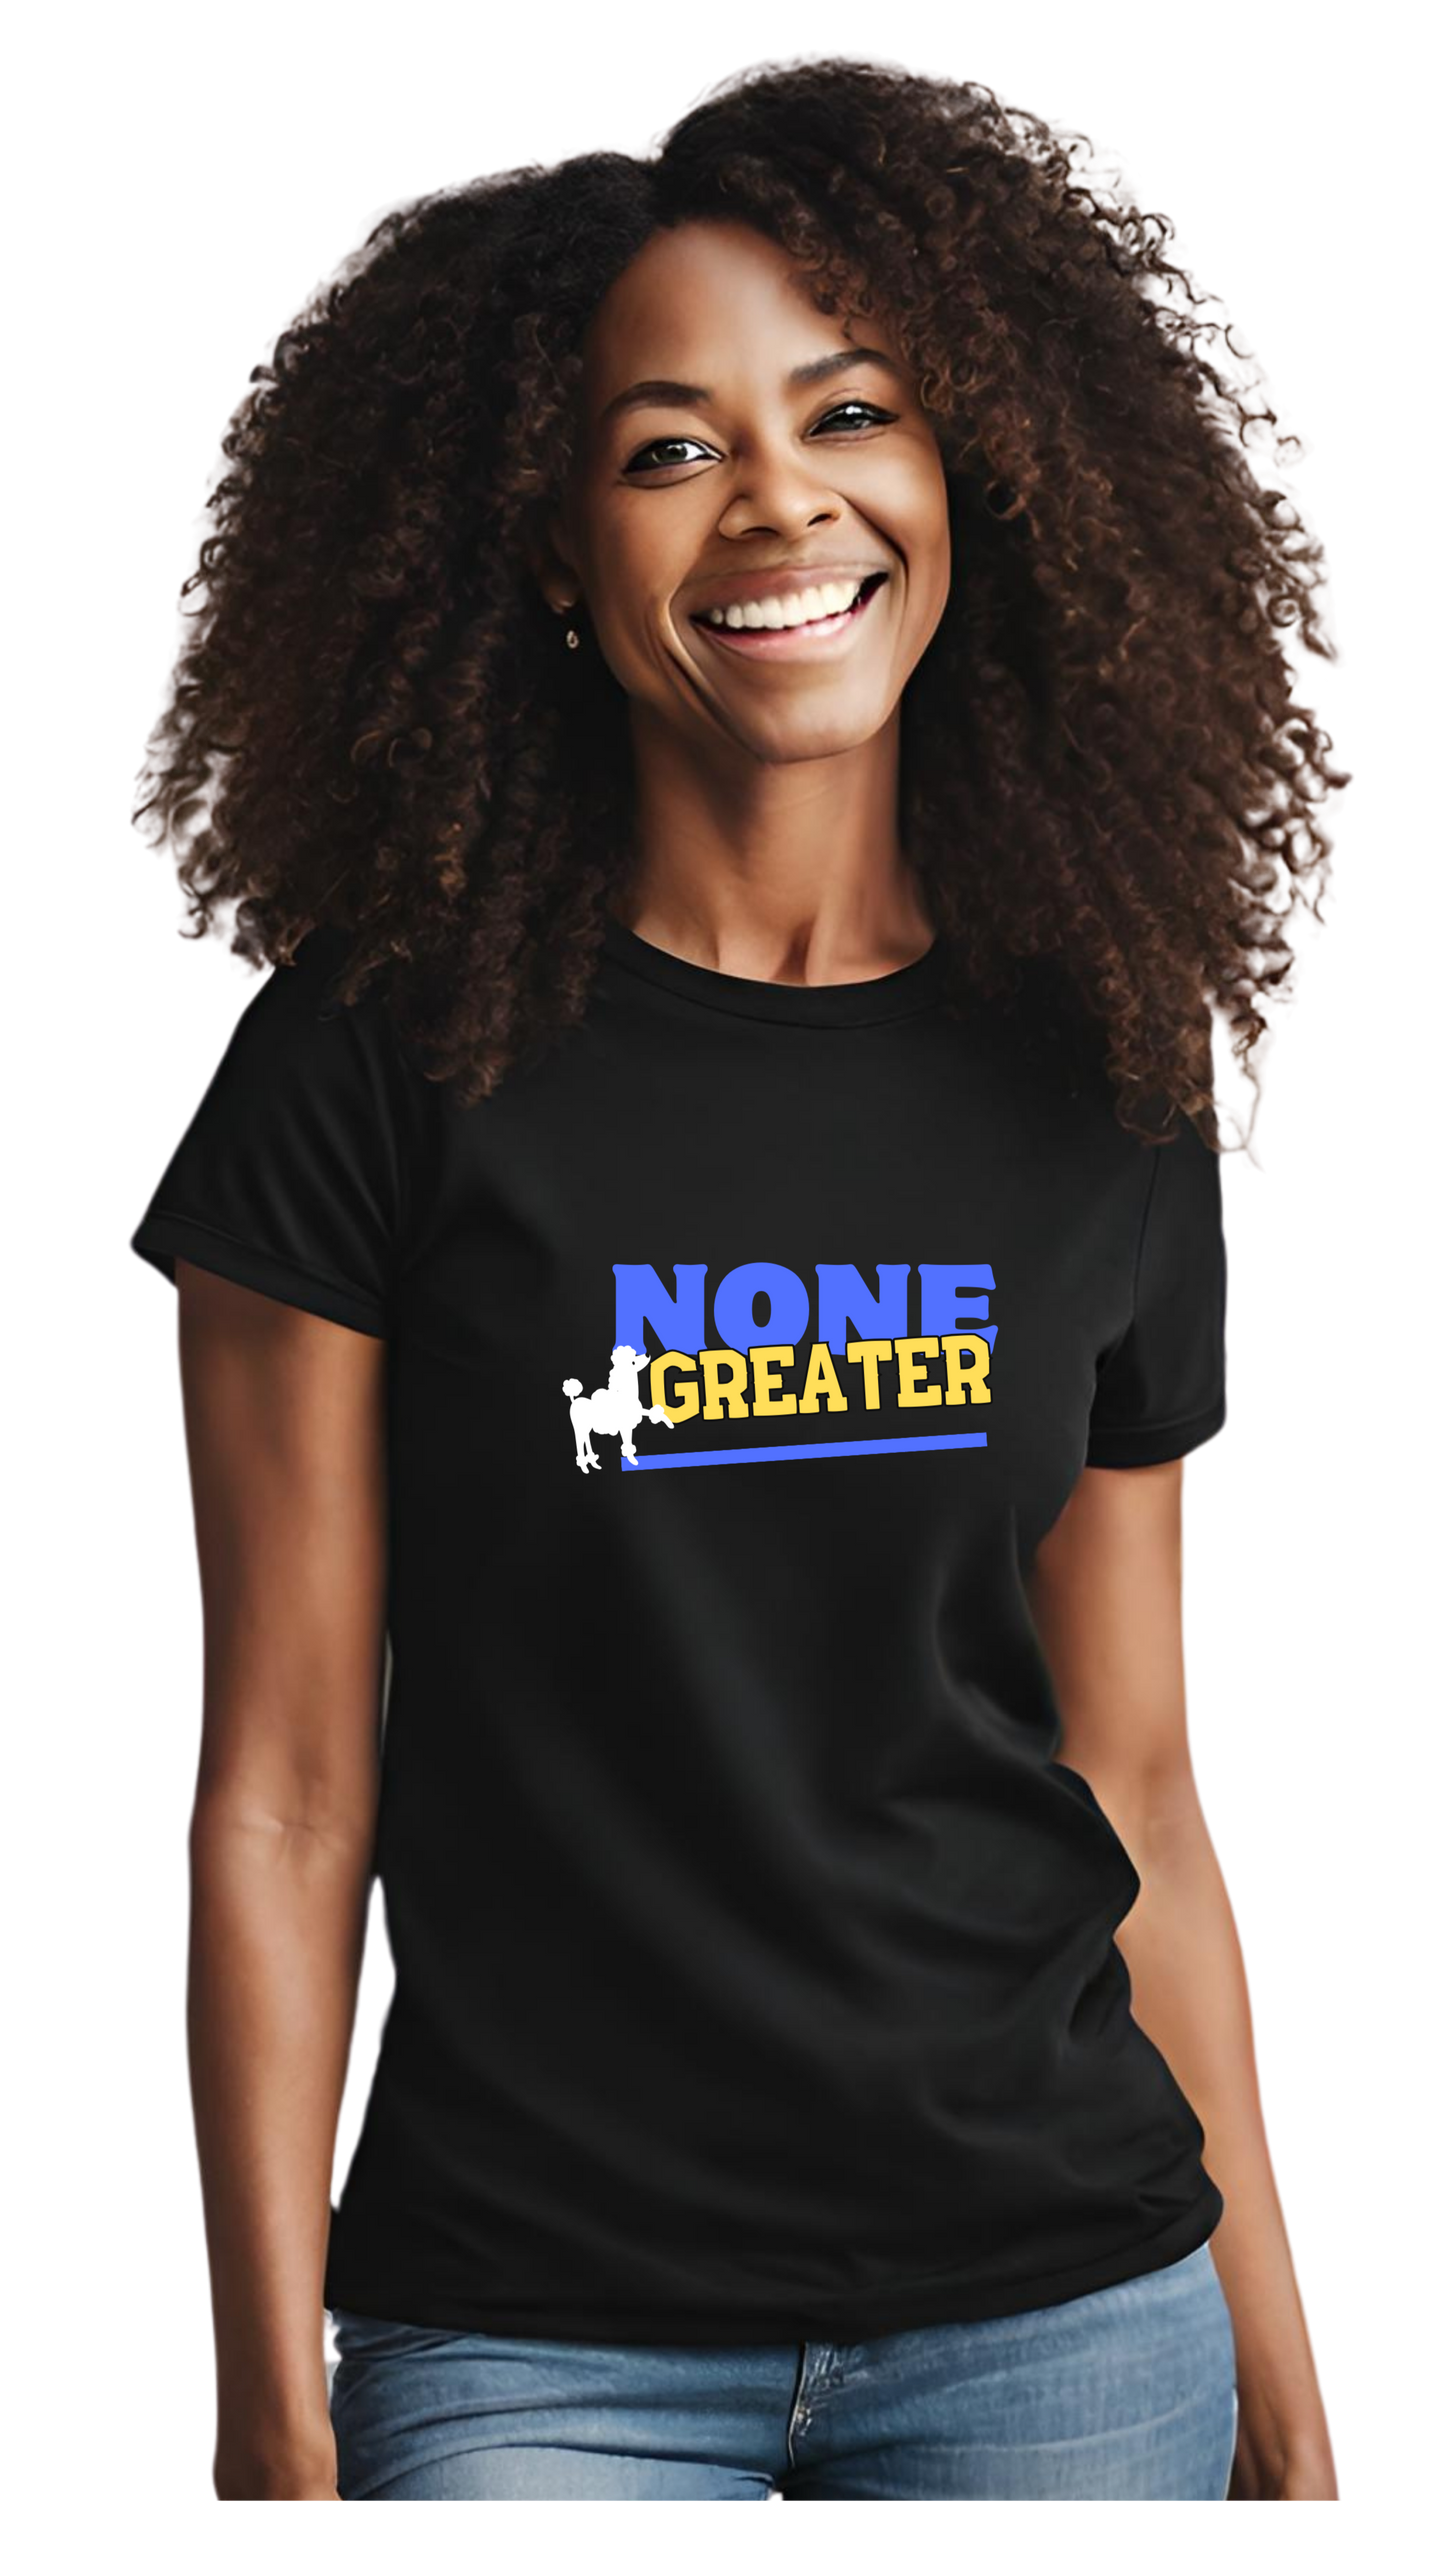 Black Unisex Heavy Cotton Tee saying "None Greater" in Royal Blue and Gold w/a white dog